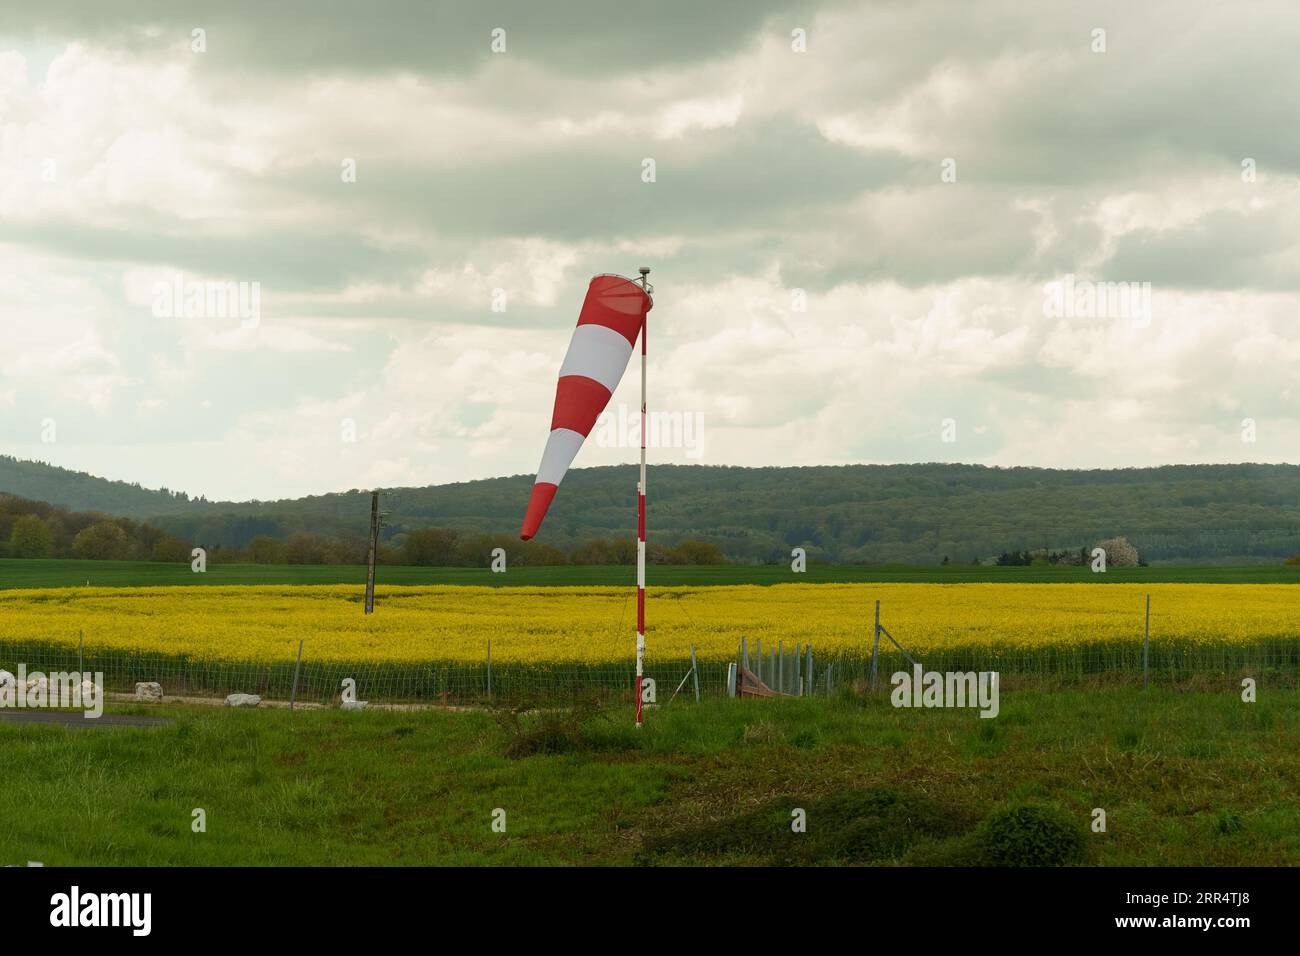 A red and white wind cone indicating the direction and strength of the wind. Light wind, cone lowered. Stock Photo